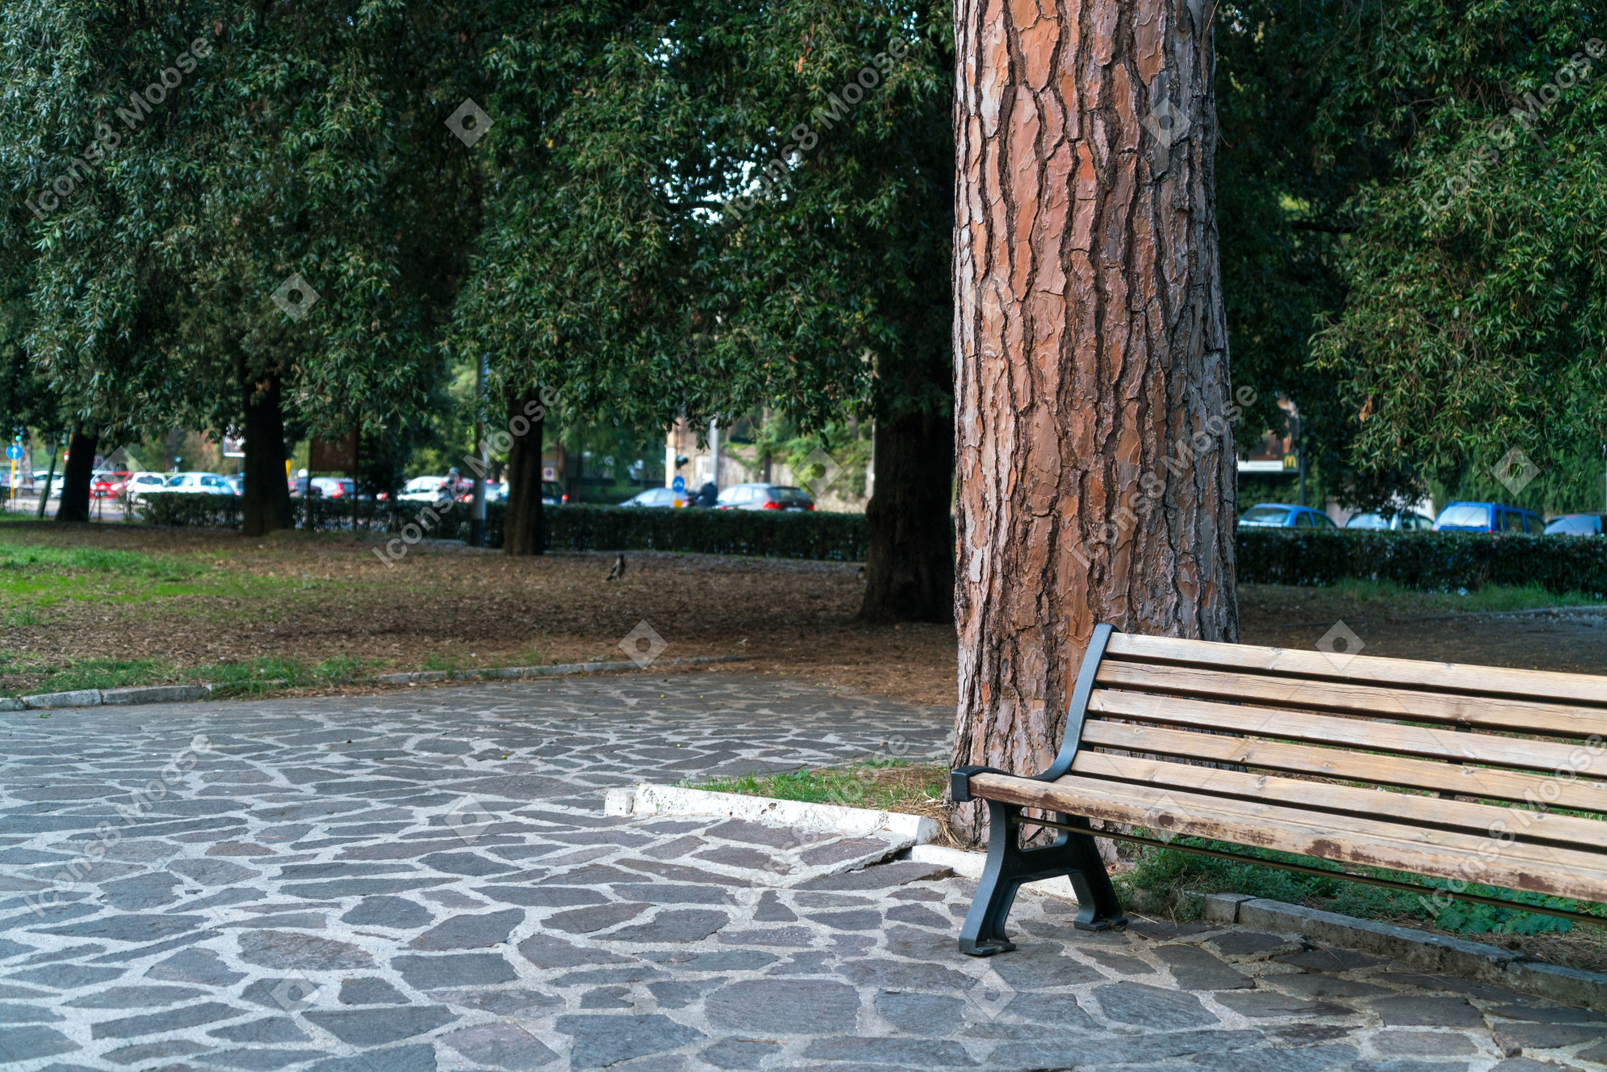 Bench next to tree in the park